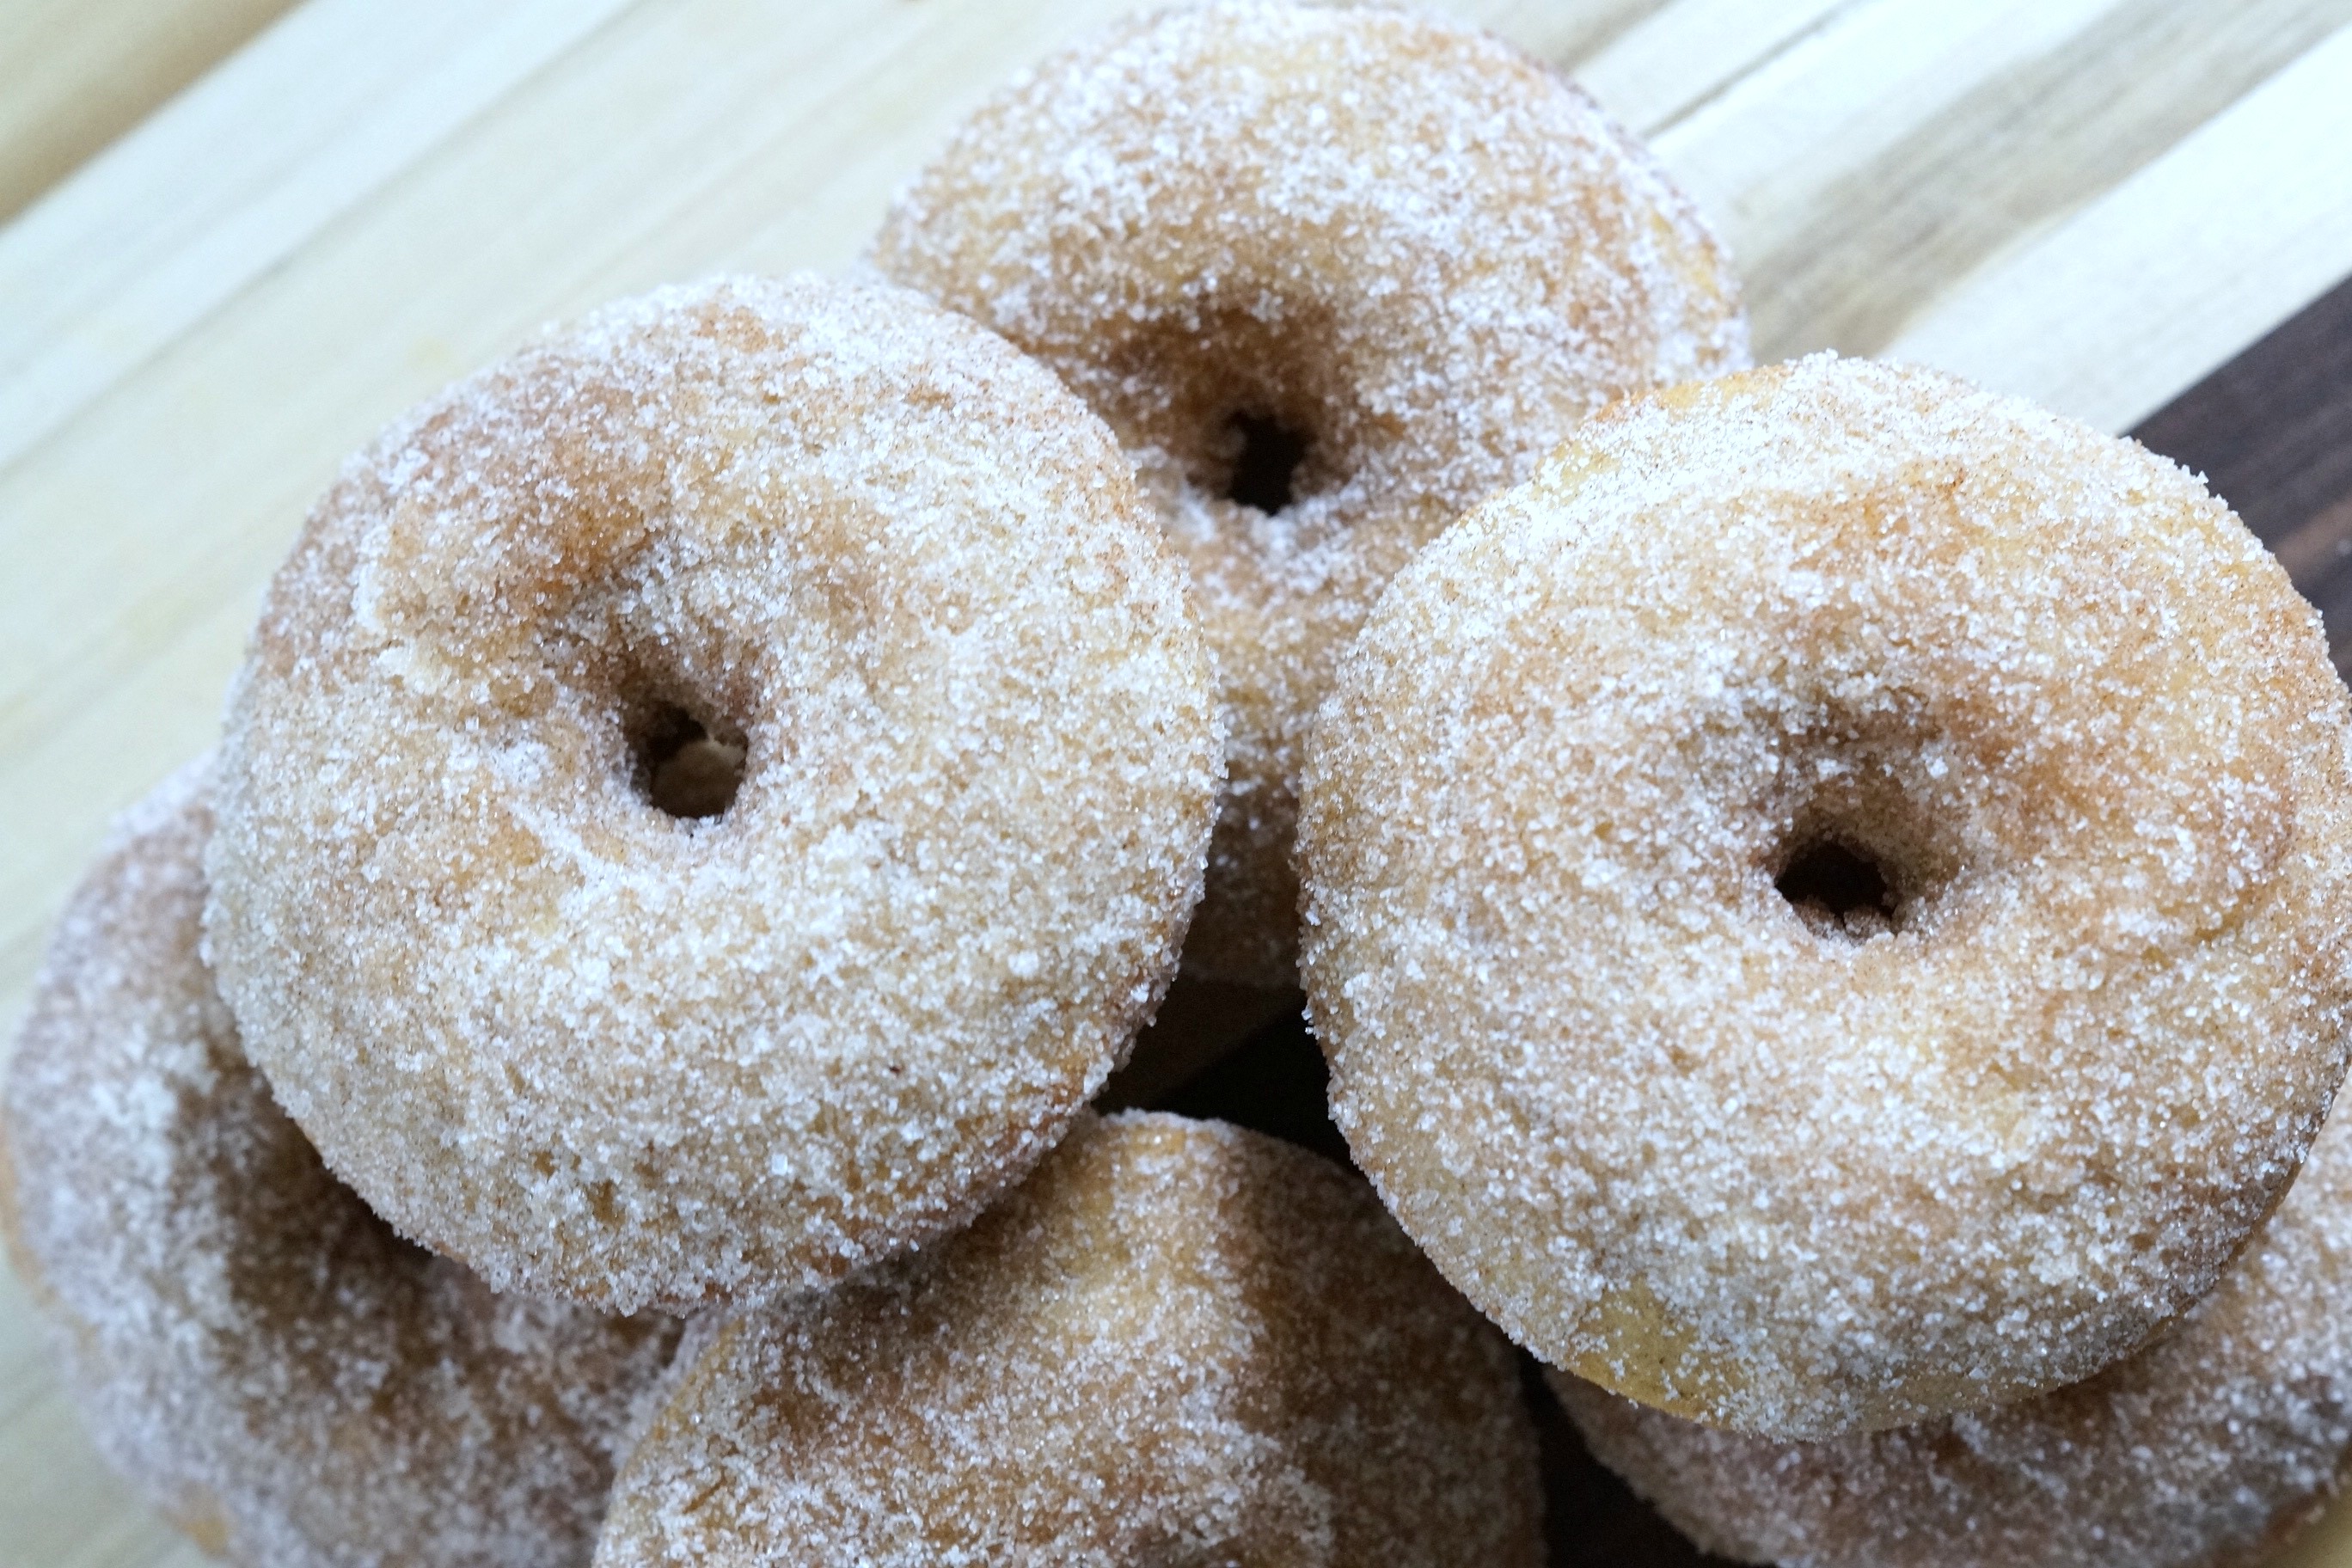 Learn how to make cinnamon sugar baked donuts by following this simple recipe! Cinnamon sugar baked donuts are perfect for lazy weekends!